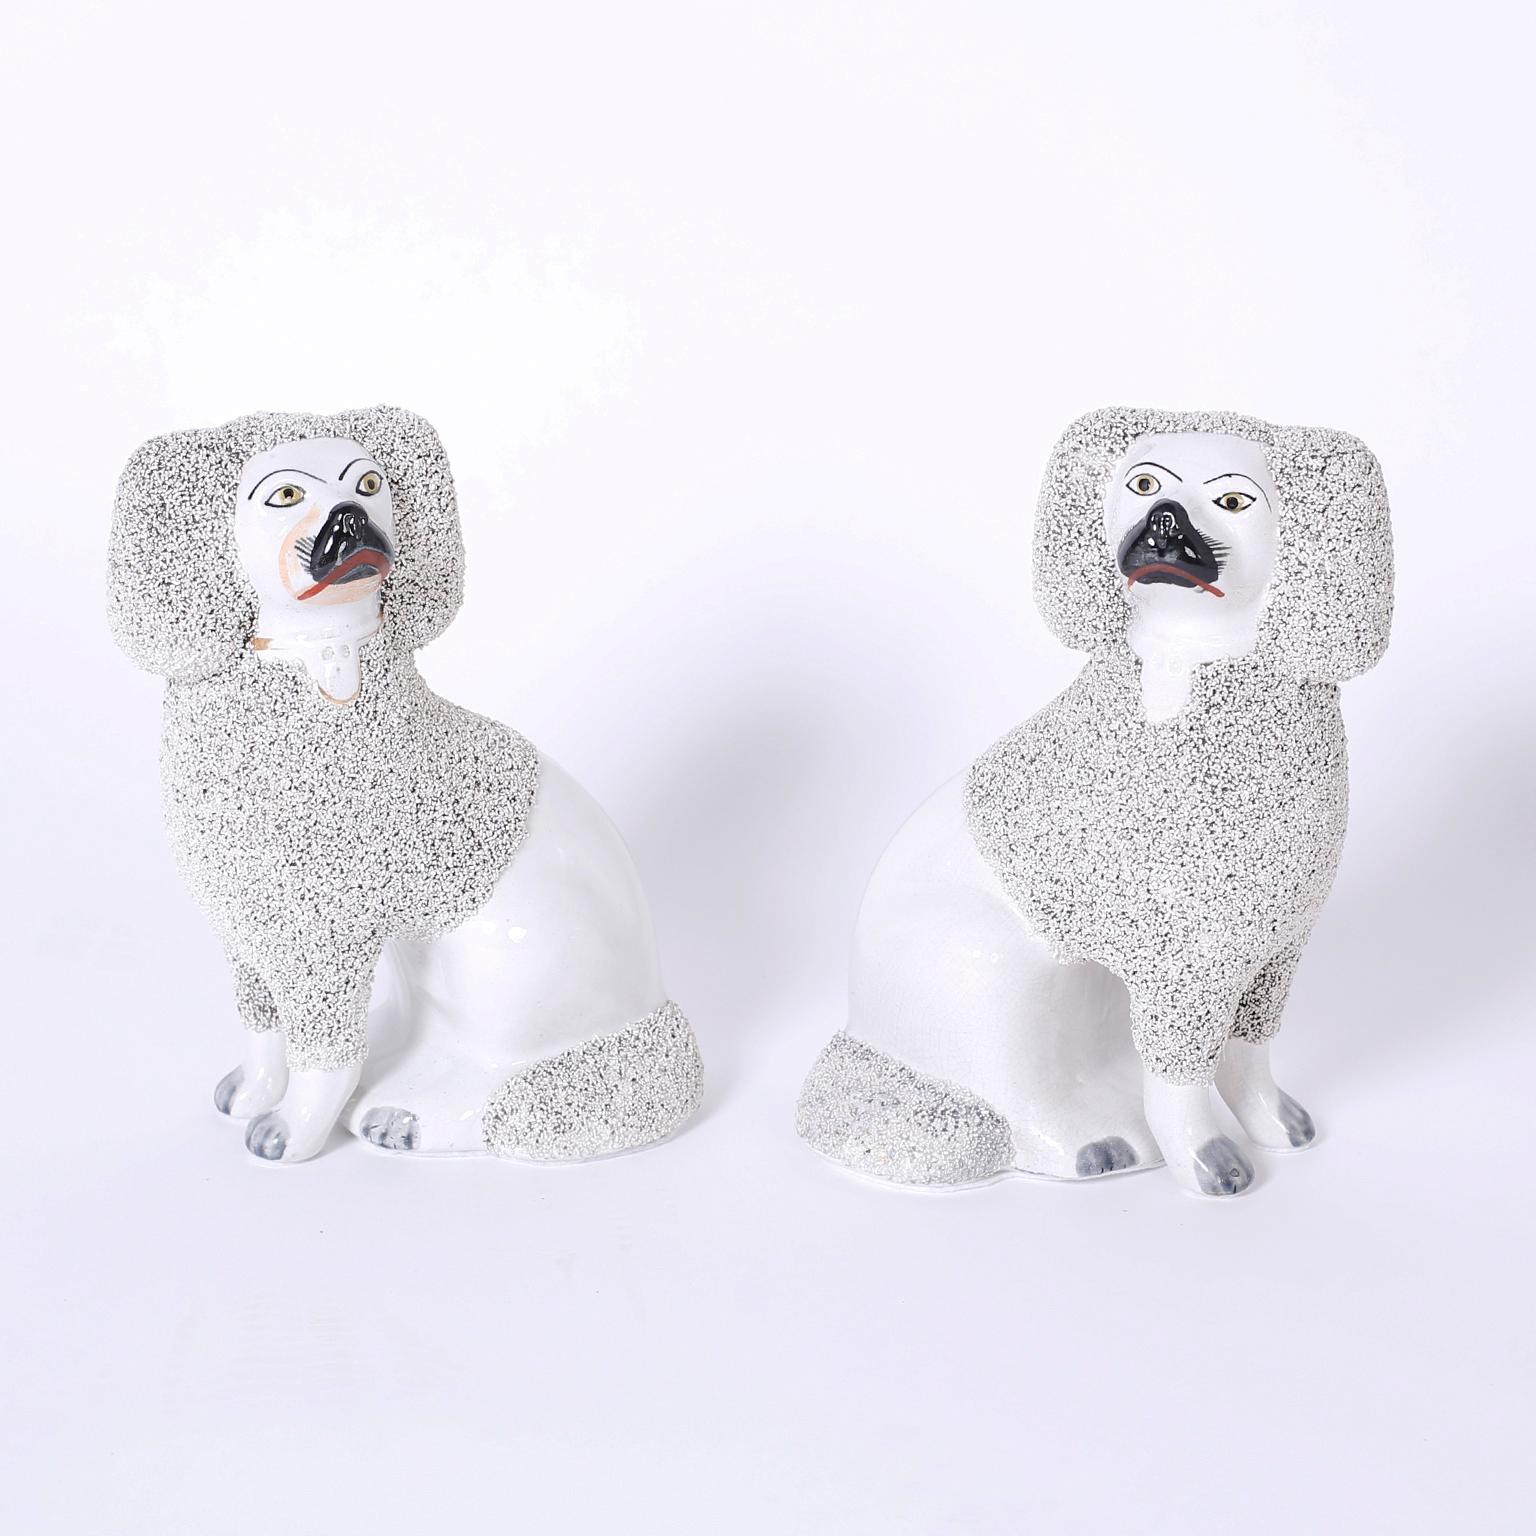 Antique pair of Staffordshire poodles cast in a press mold with English clay and in remarkable condition.